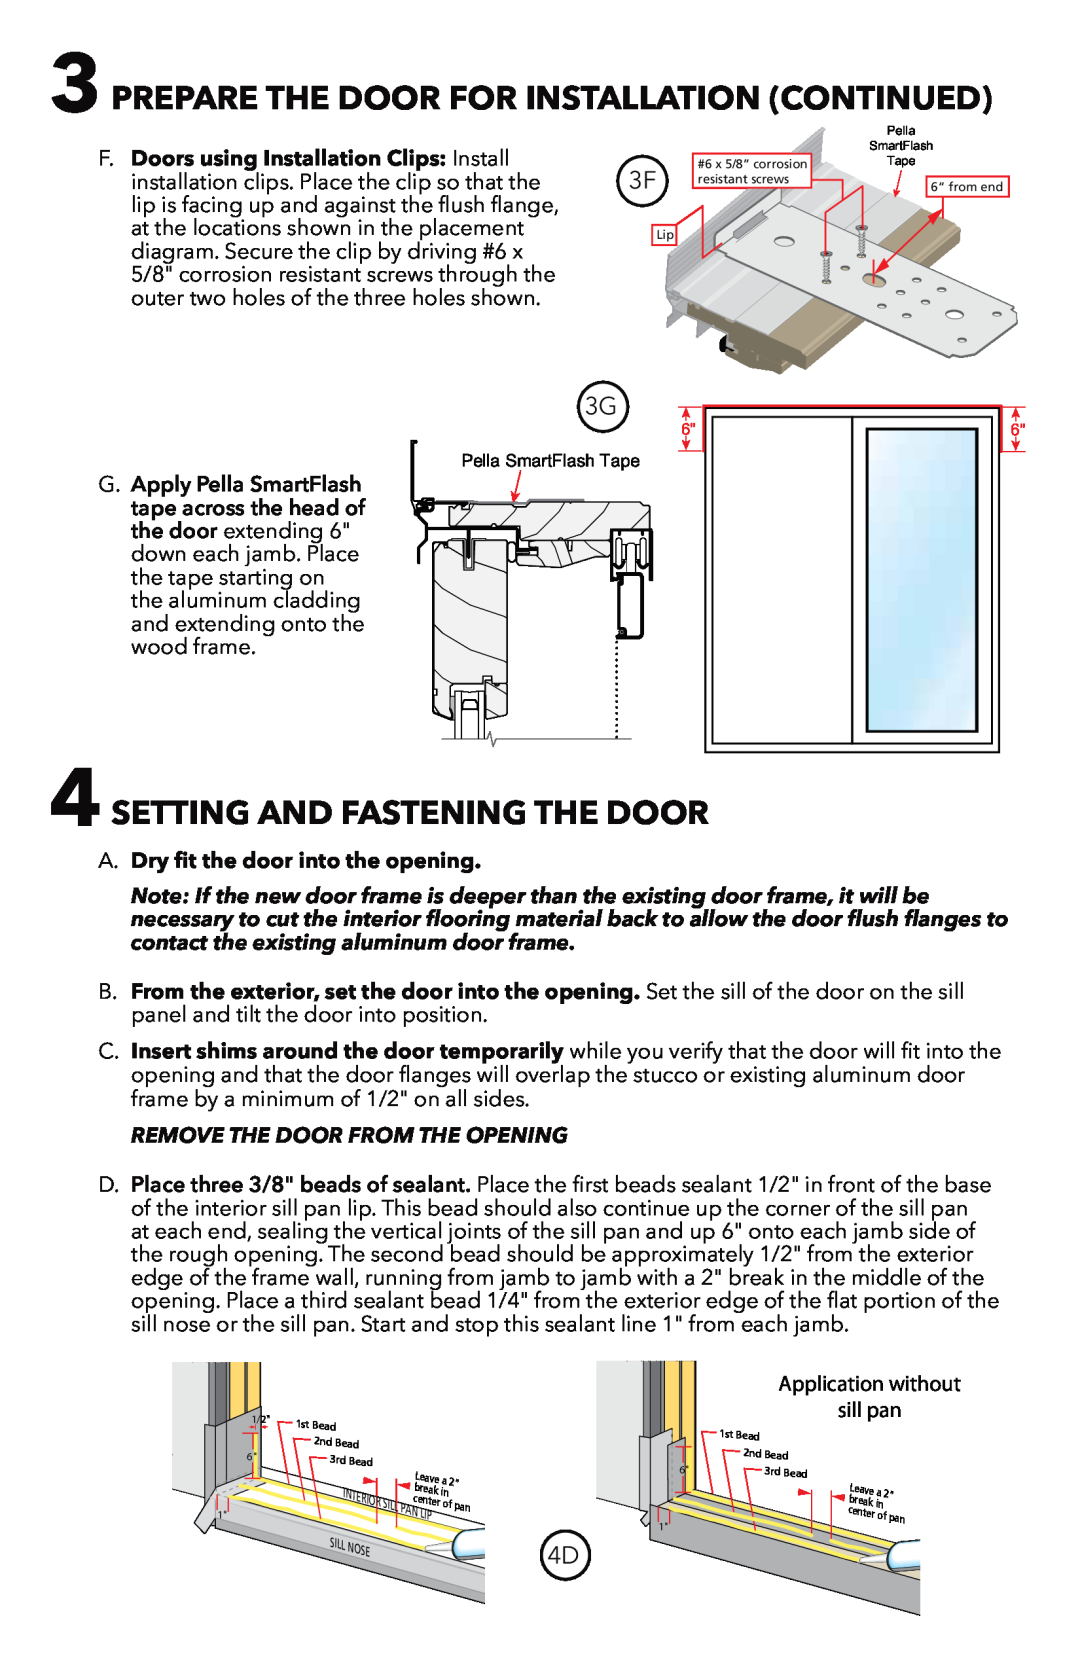 Pella 81CM0100 installation instructions Prepare The Door For Installation Continued, Setting And Fastening The Door 